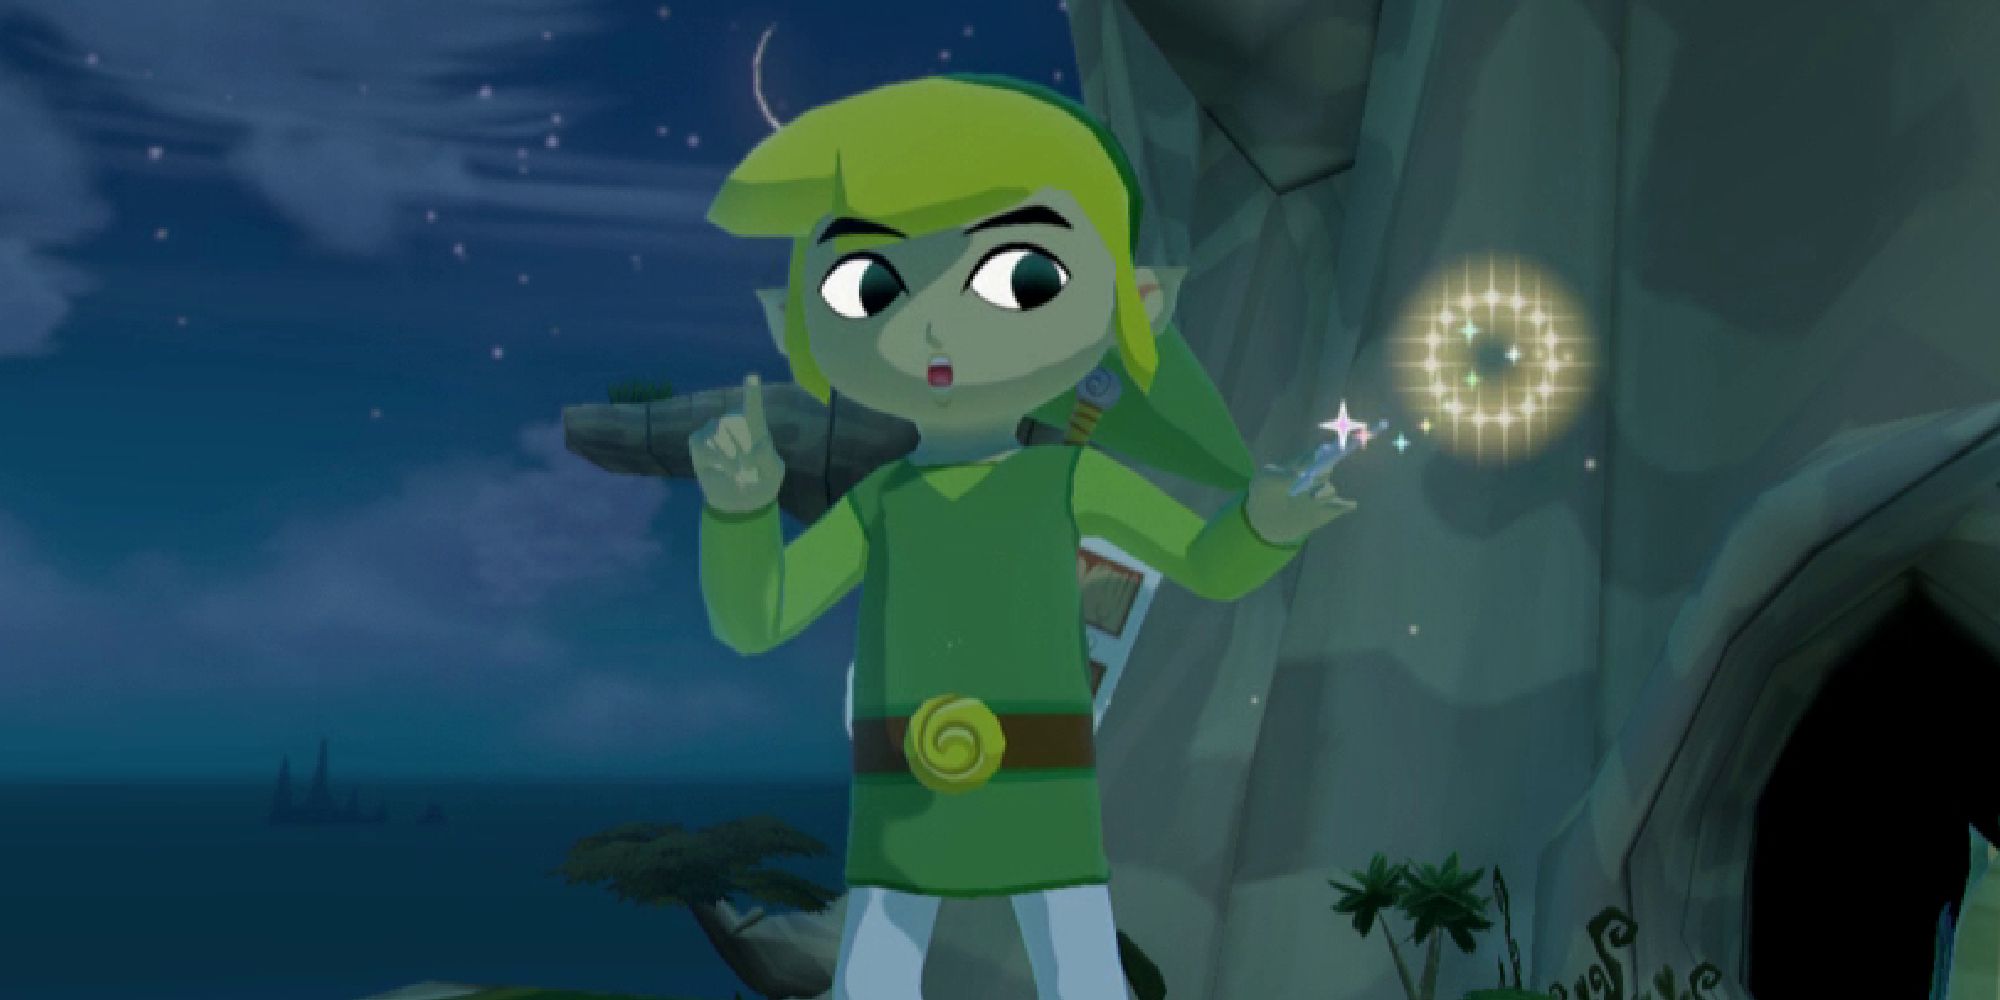 Link conducting wind in The Wind Waker